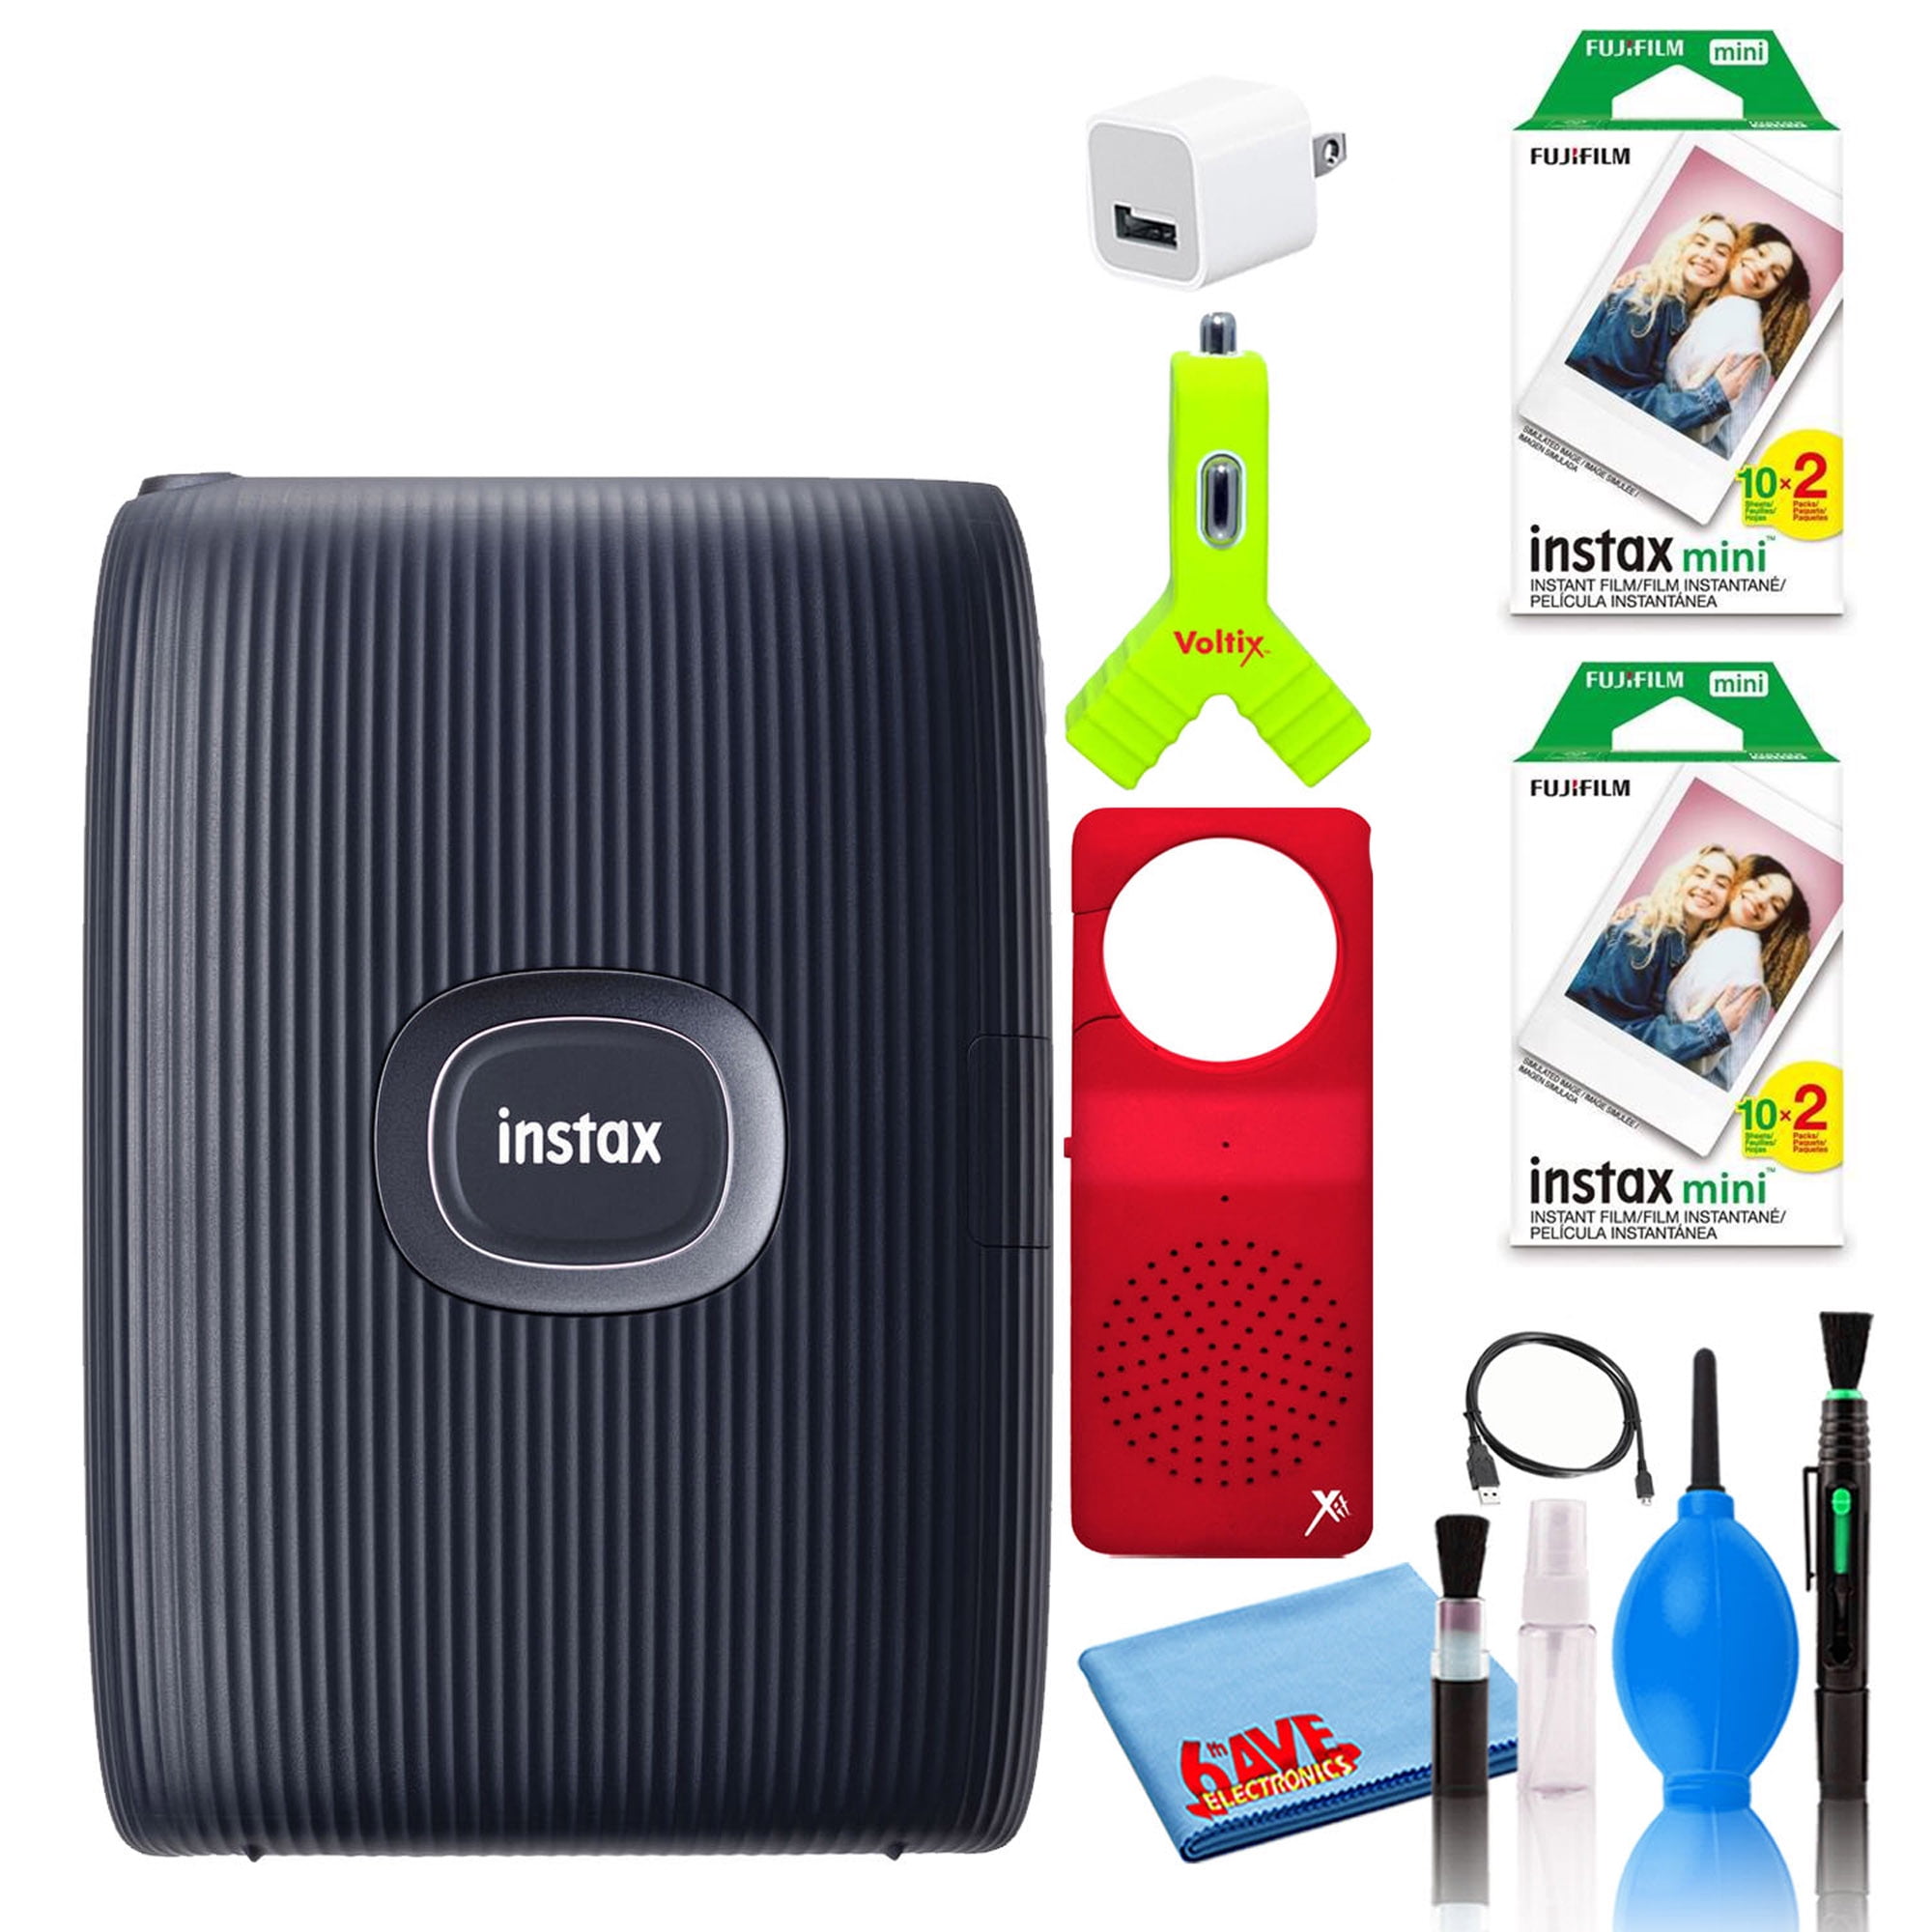 Fujifilm Instax Mini Link 2 Portable Smartphone Printer (Space Blue)  Creative Kit Film Bundle with (40) Instax Mini Films + Bluetooth Speaker +  On-The-Go Kit + 6AVE Cleaning Kit + More 